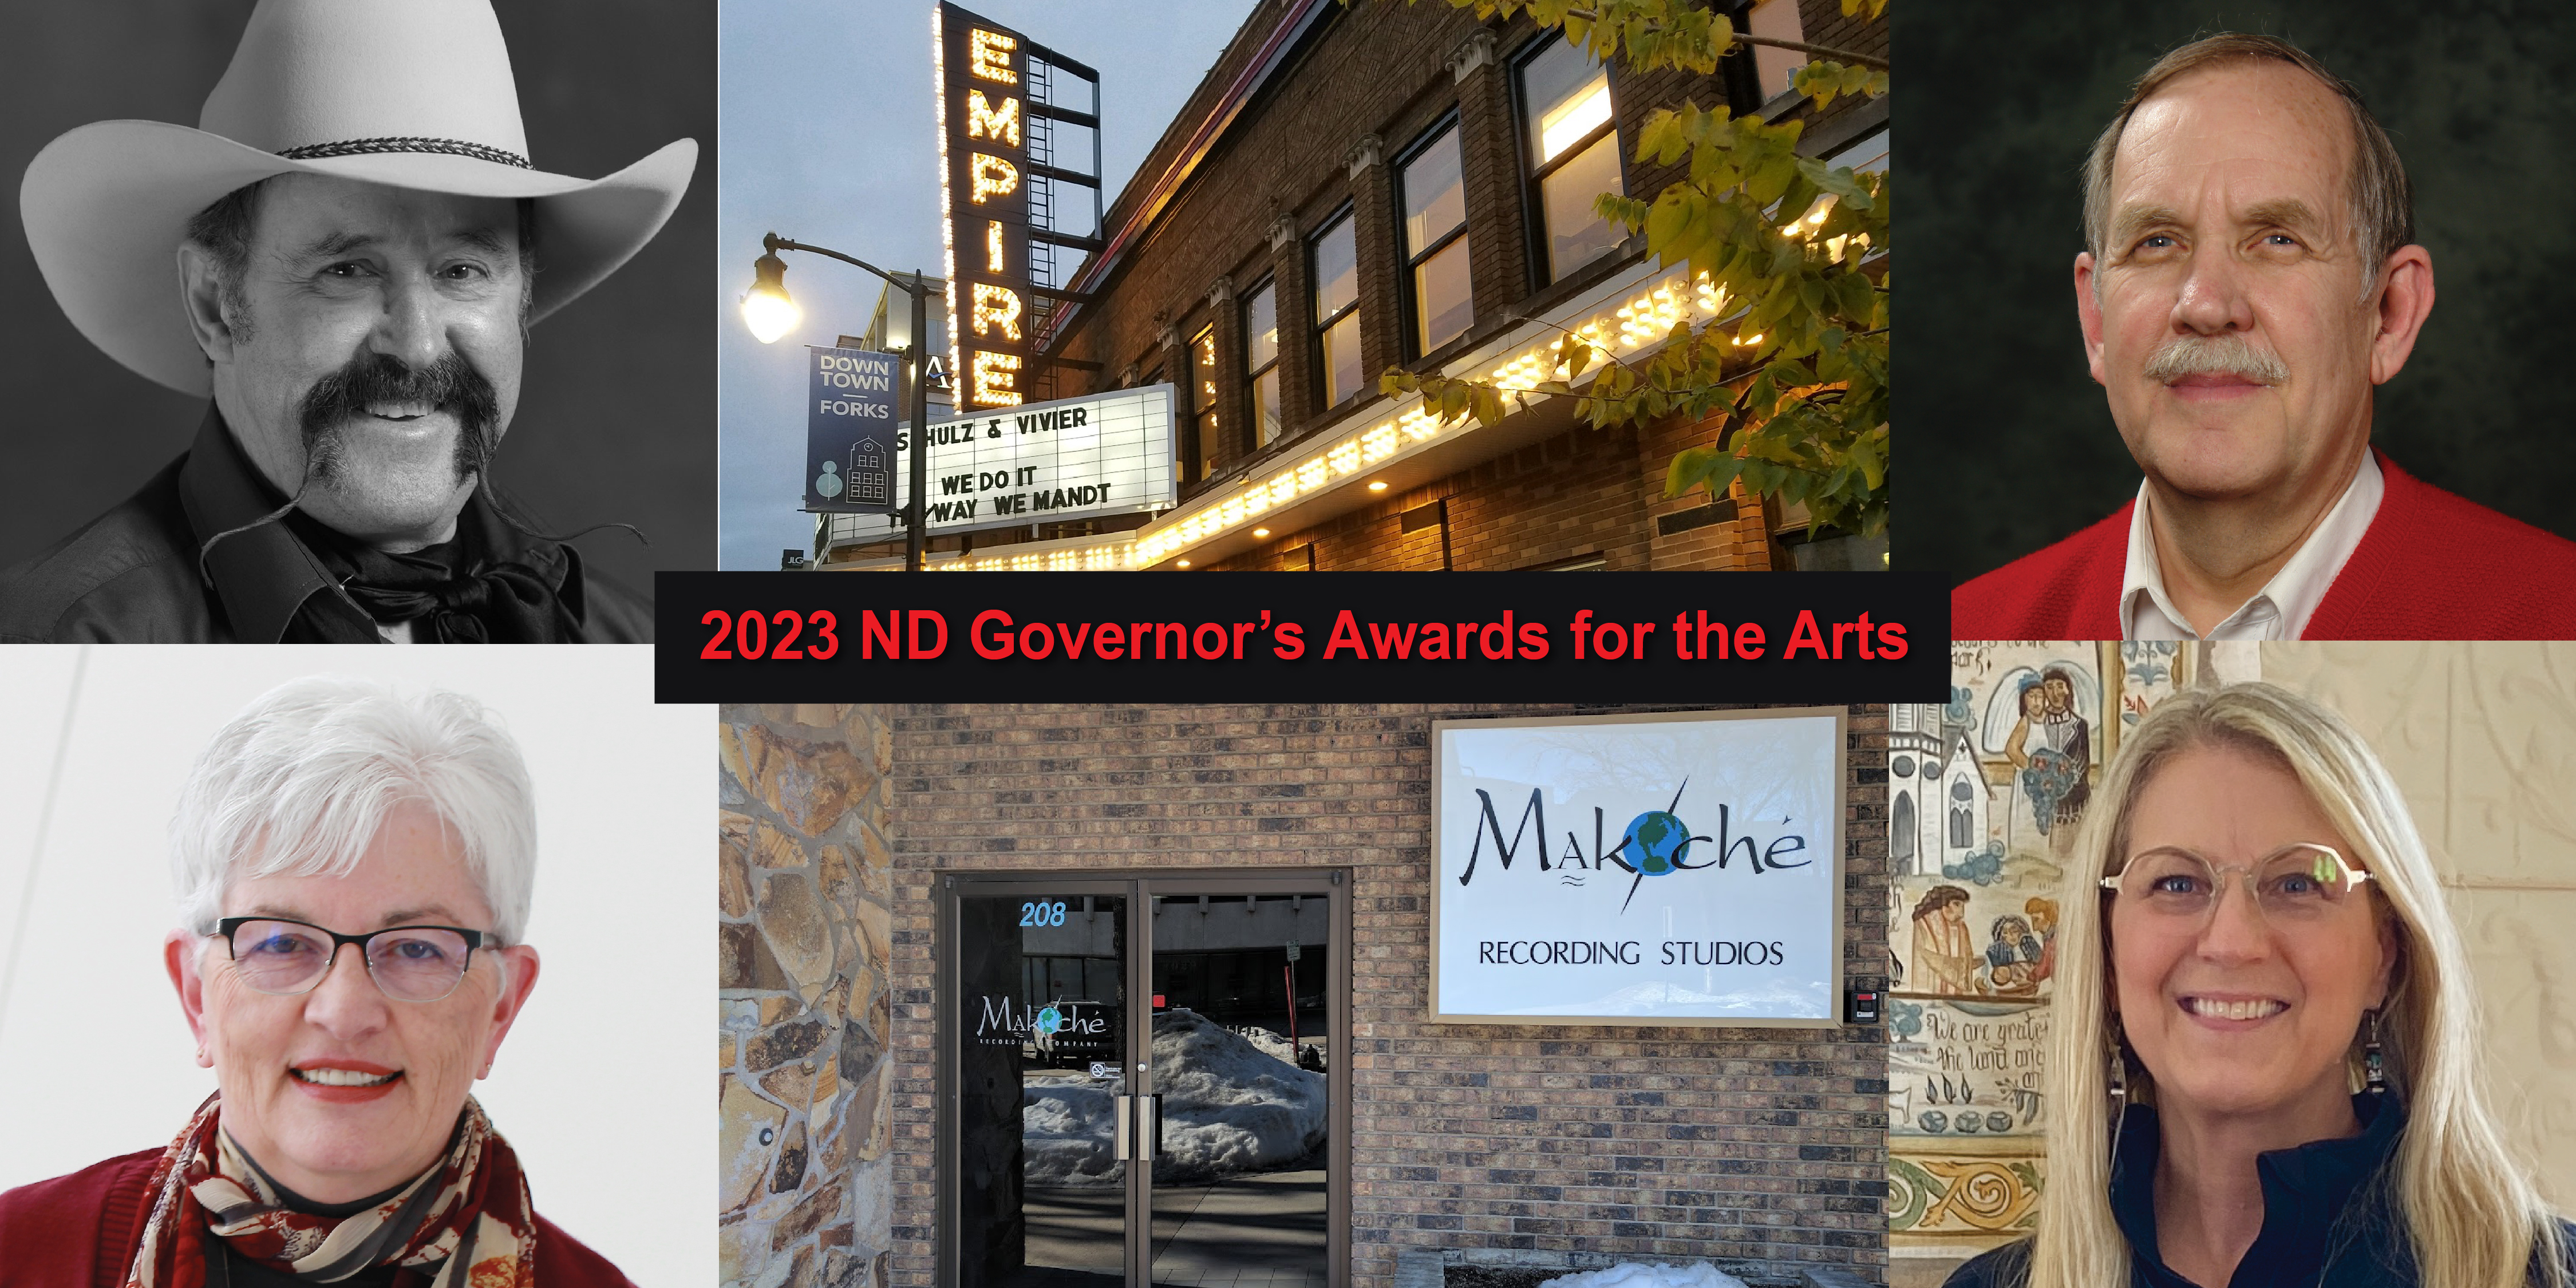 Congratulation to the 2023 Recipients of the ND Governor's Awards for the Arts:  Individual Achievement: Pieper Fleck Bloomquist (bottom right) Nonprofit Arts Organization: Empire Arts Center (top center) For-Profit Arts Organization: Makoché Recording Studios (bottom center) Arts in Education: Donald E. Larew (top right) Individual Cultural Heritage: Bill Lowman (top left) Champion for the Arts: Senator Joan Heckaman (bottom left)